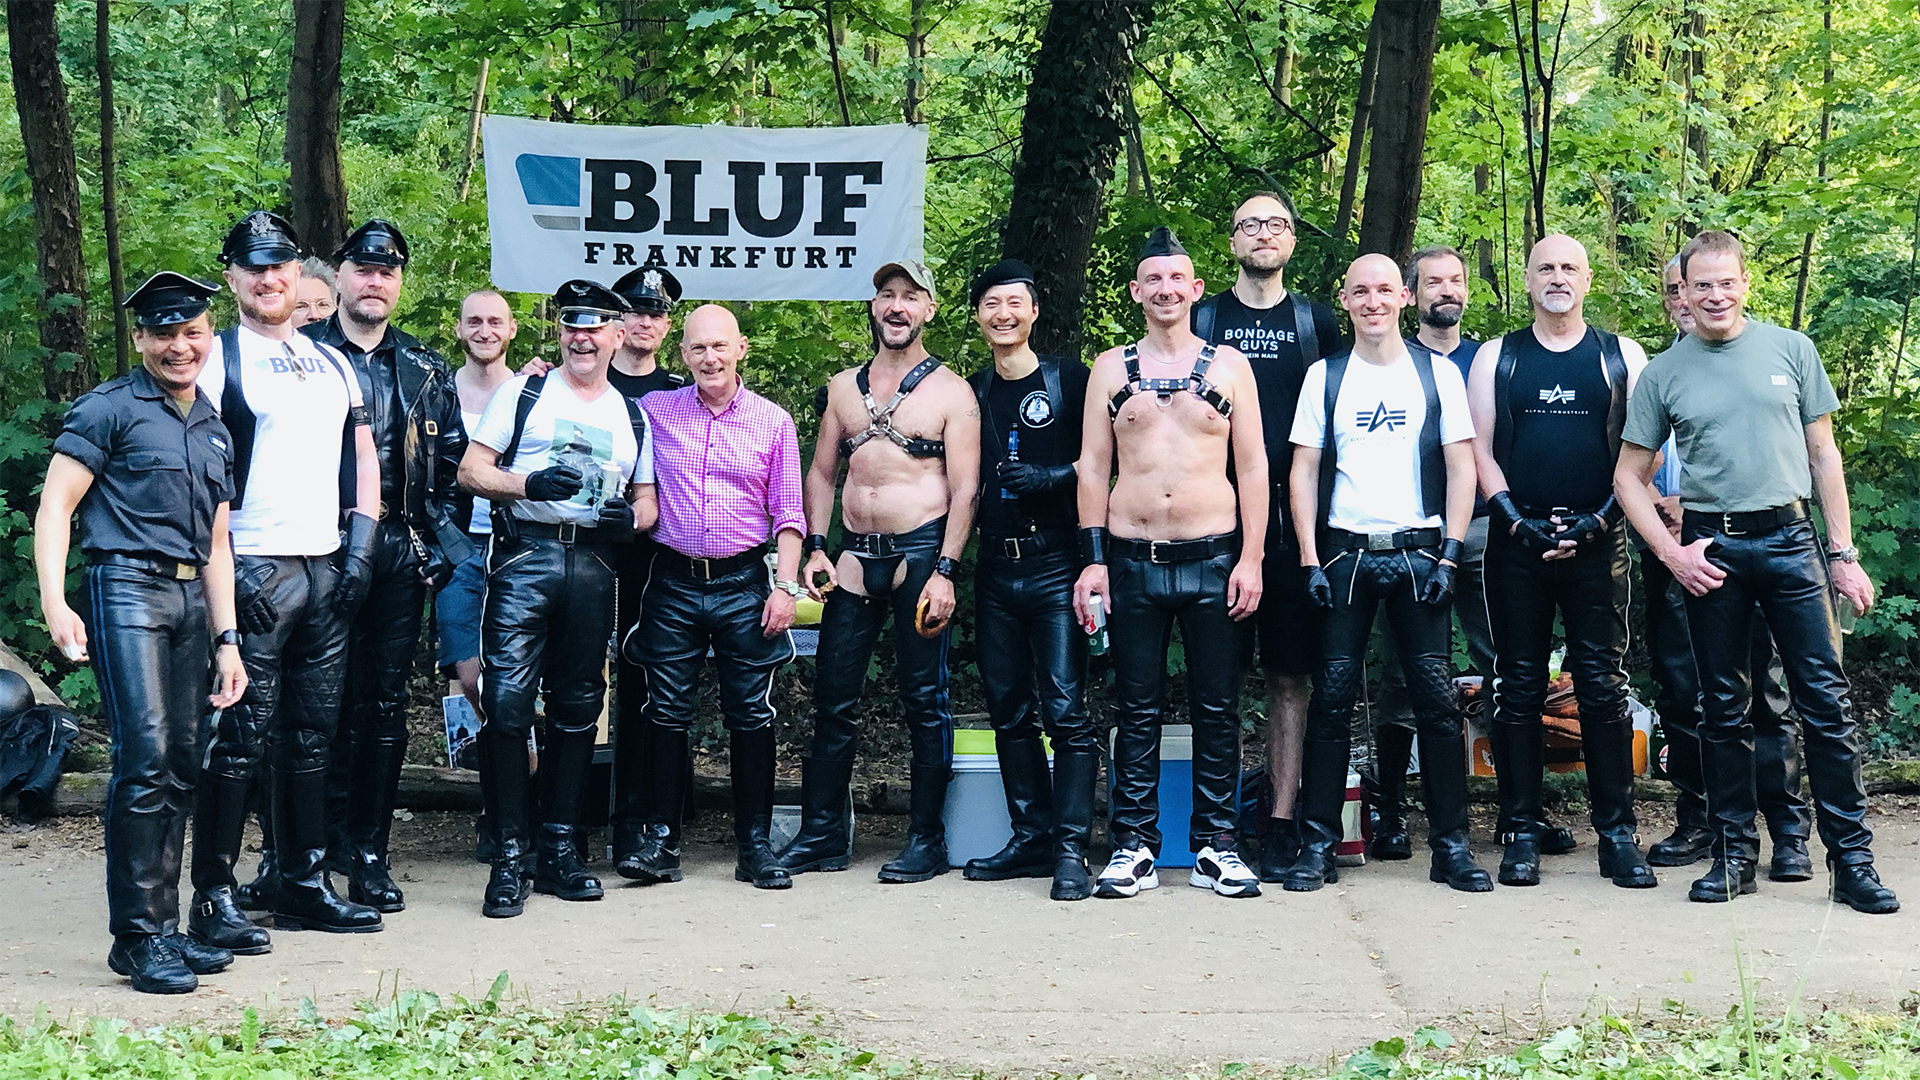 It's time to shine and to show your pride! Welcome to BLUF Frankfurt!